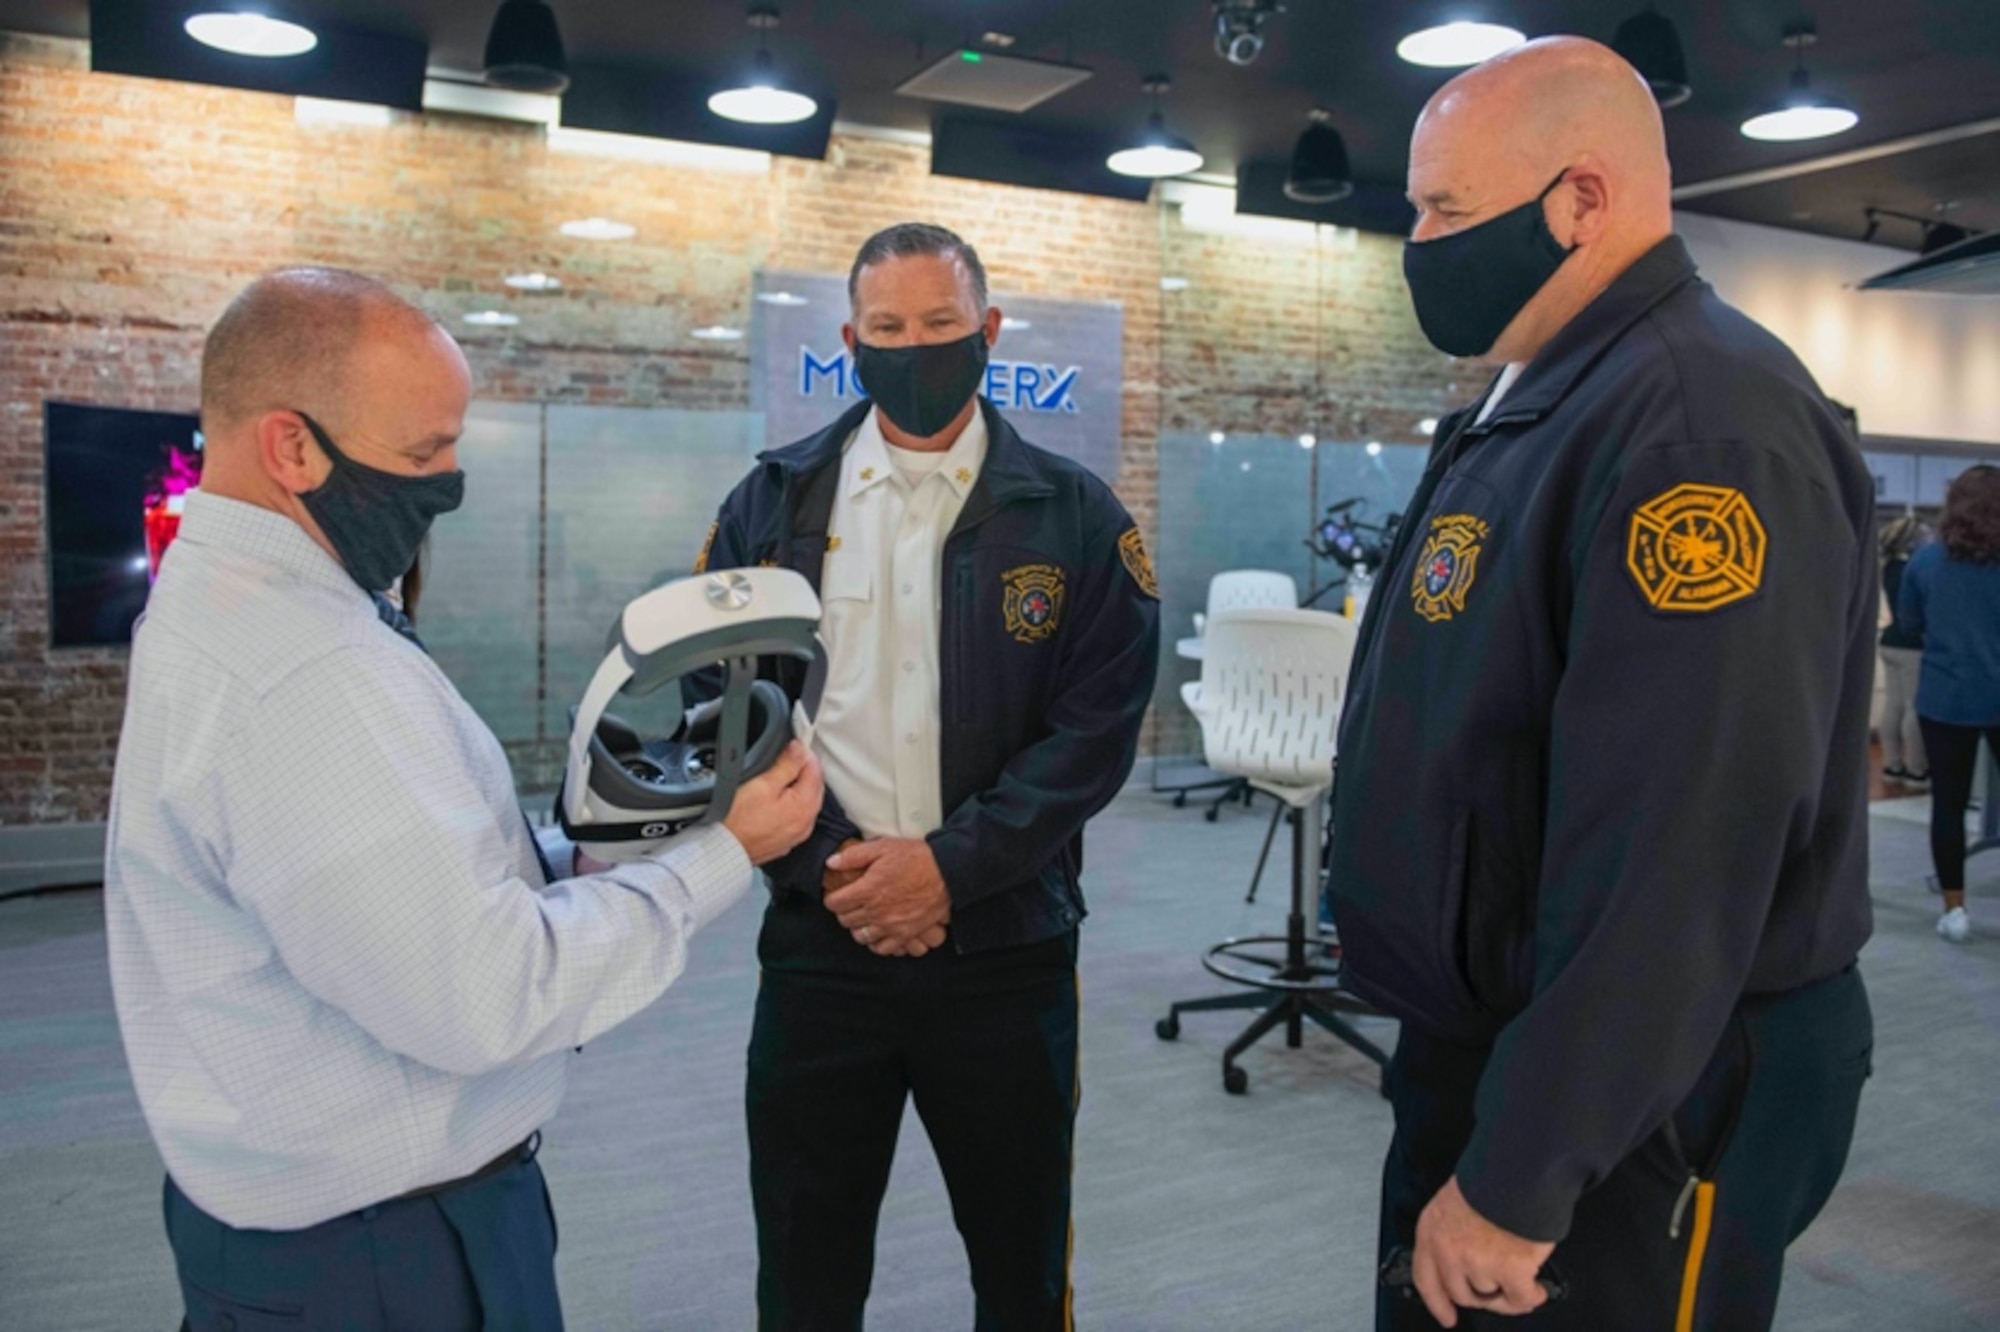 Dr. Andy Clayton, assistant professor of leadership and augmented reality/virtual reality research task force director at Air University, discusses the benefits of introducing AR/VR to education and training programs with two local firefighters during the MGMWERX AR/VR iExpo in Montgomery, Alabama, Nov. 9, 2021. Clayton explained that this type of immersive learning can help people retain information from their VR experience and allows them to interact with educational content. (U.S. Air Force photo by Staff Sgt. Lauren Silverthorne)